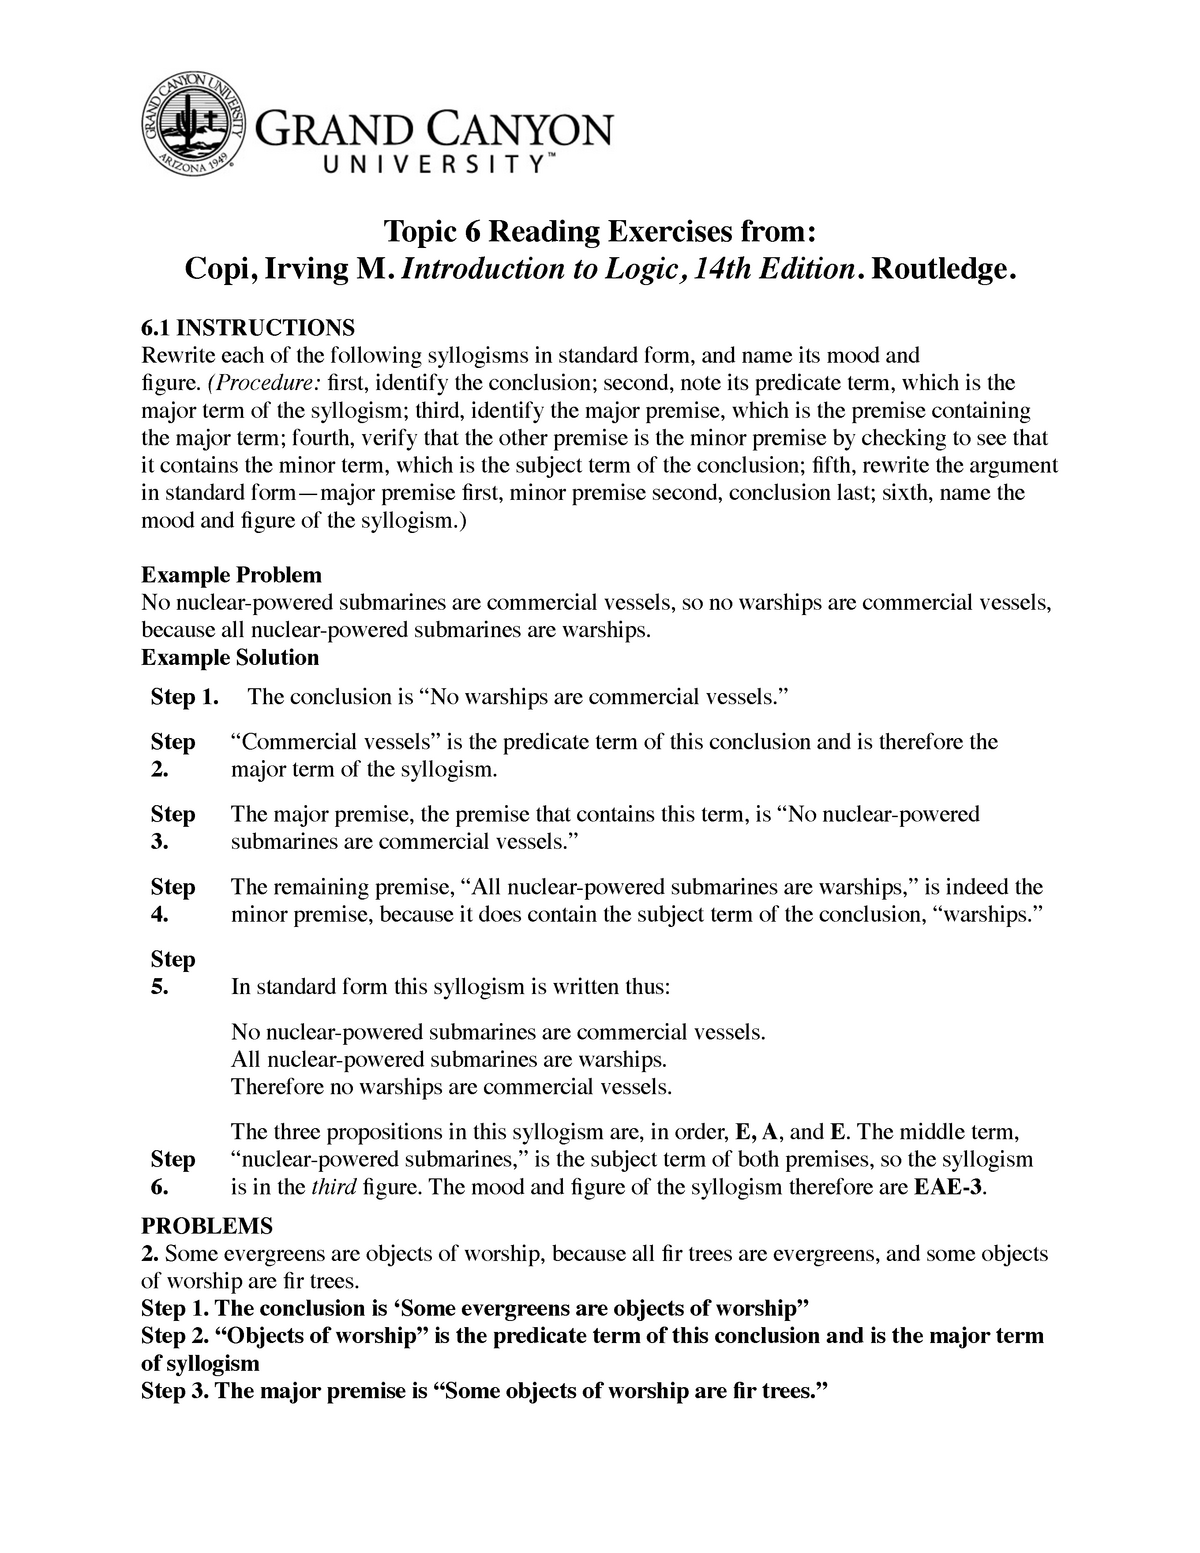 com362-t6-reading-exercises-topic-6-reading-exercises-from-copi